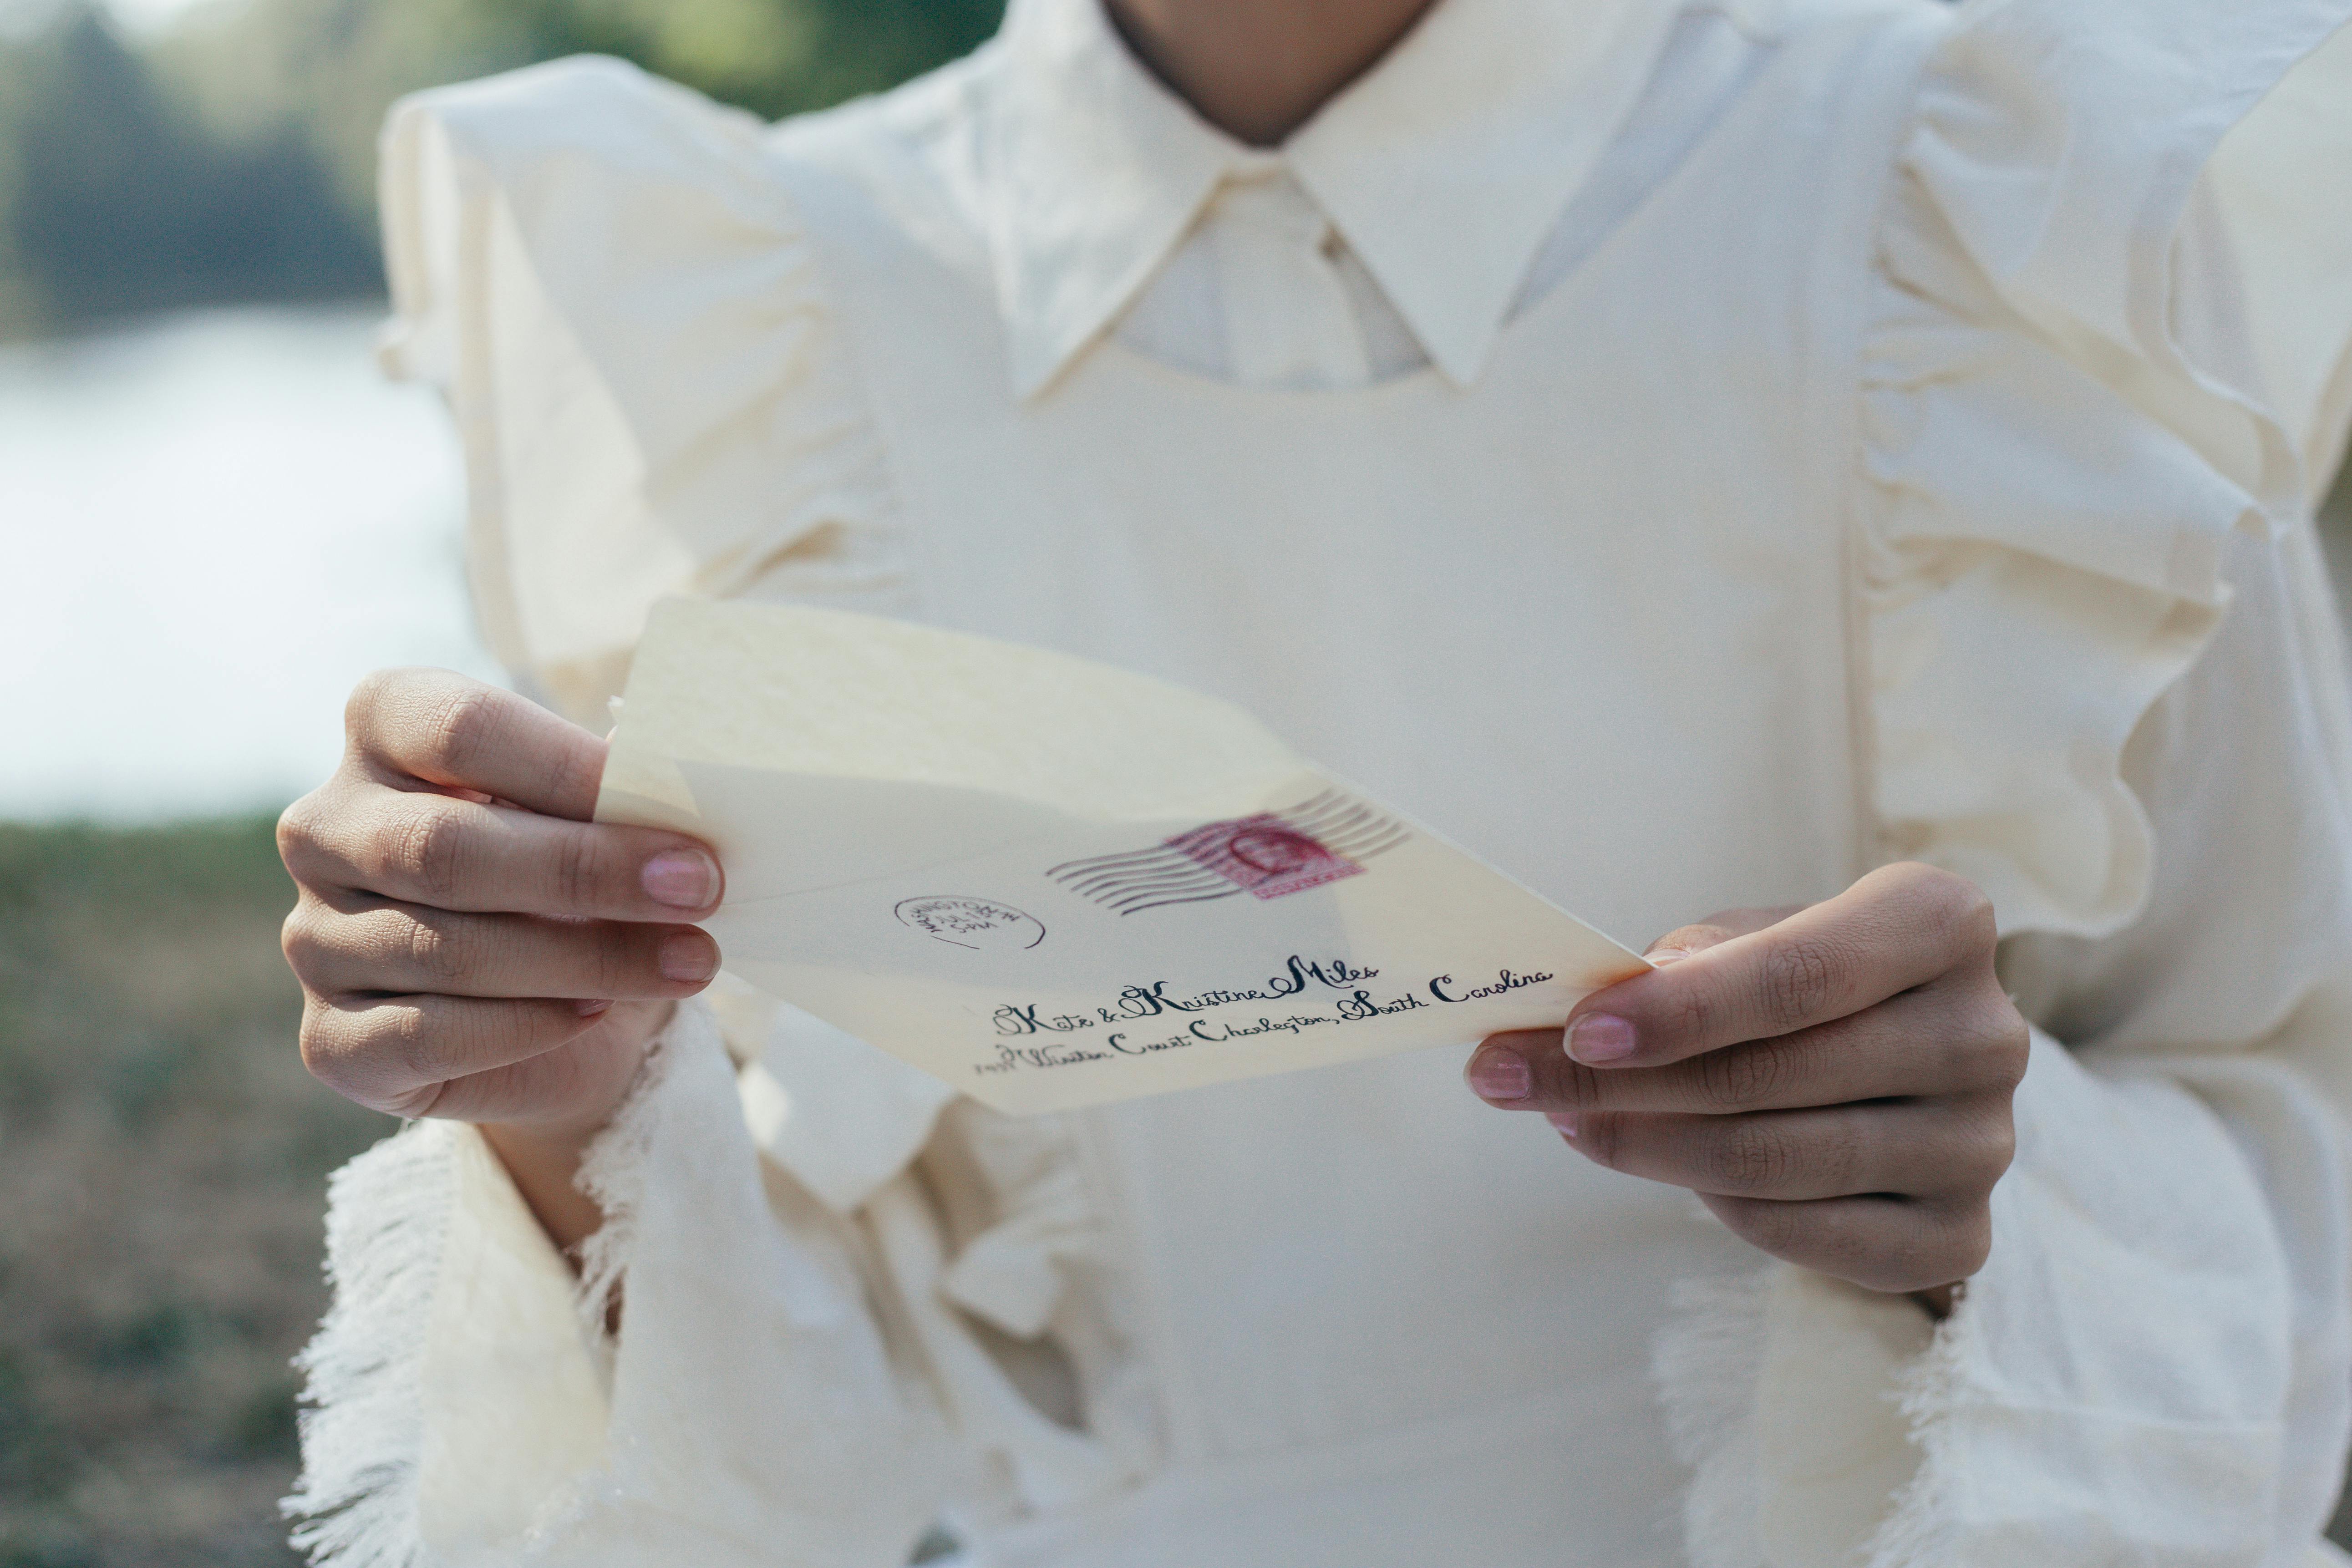 A person in a white dress holding a letter | Source: Pexels